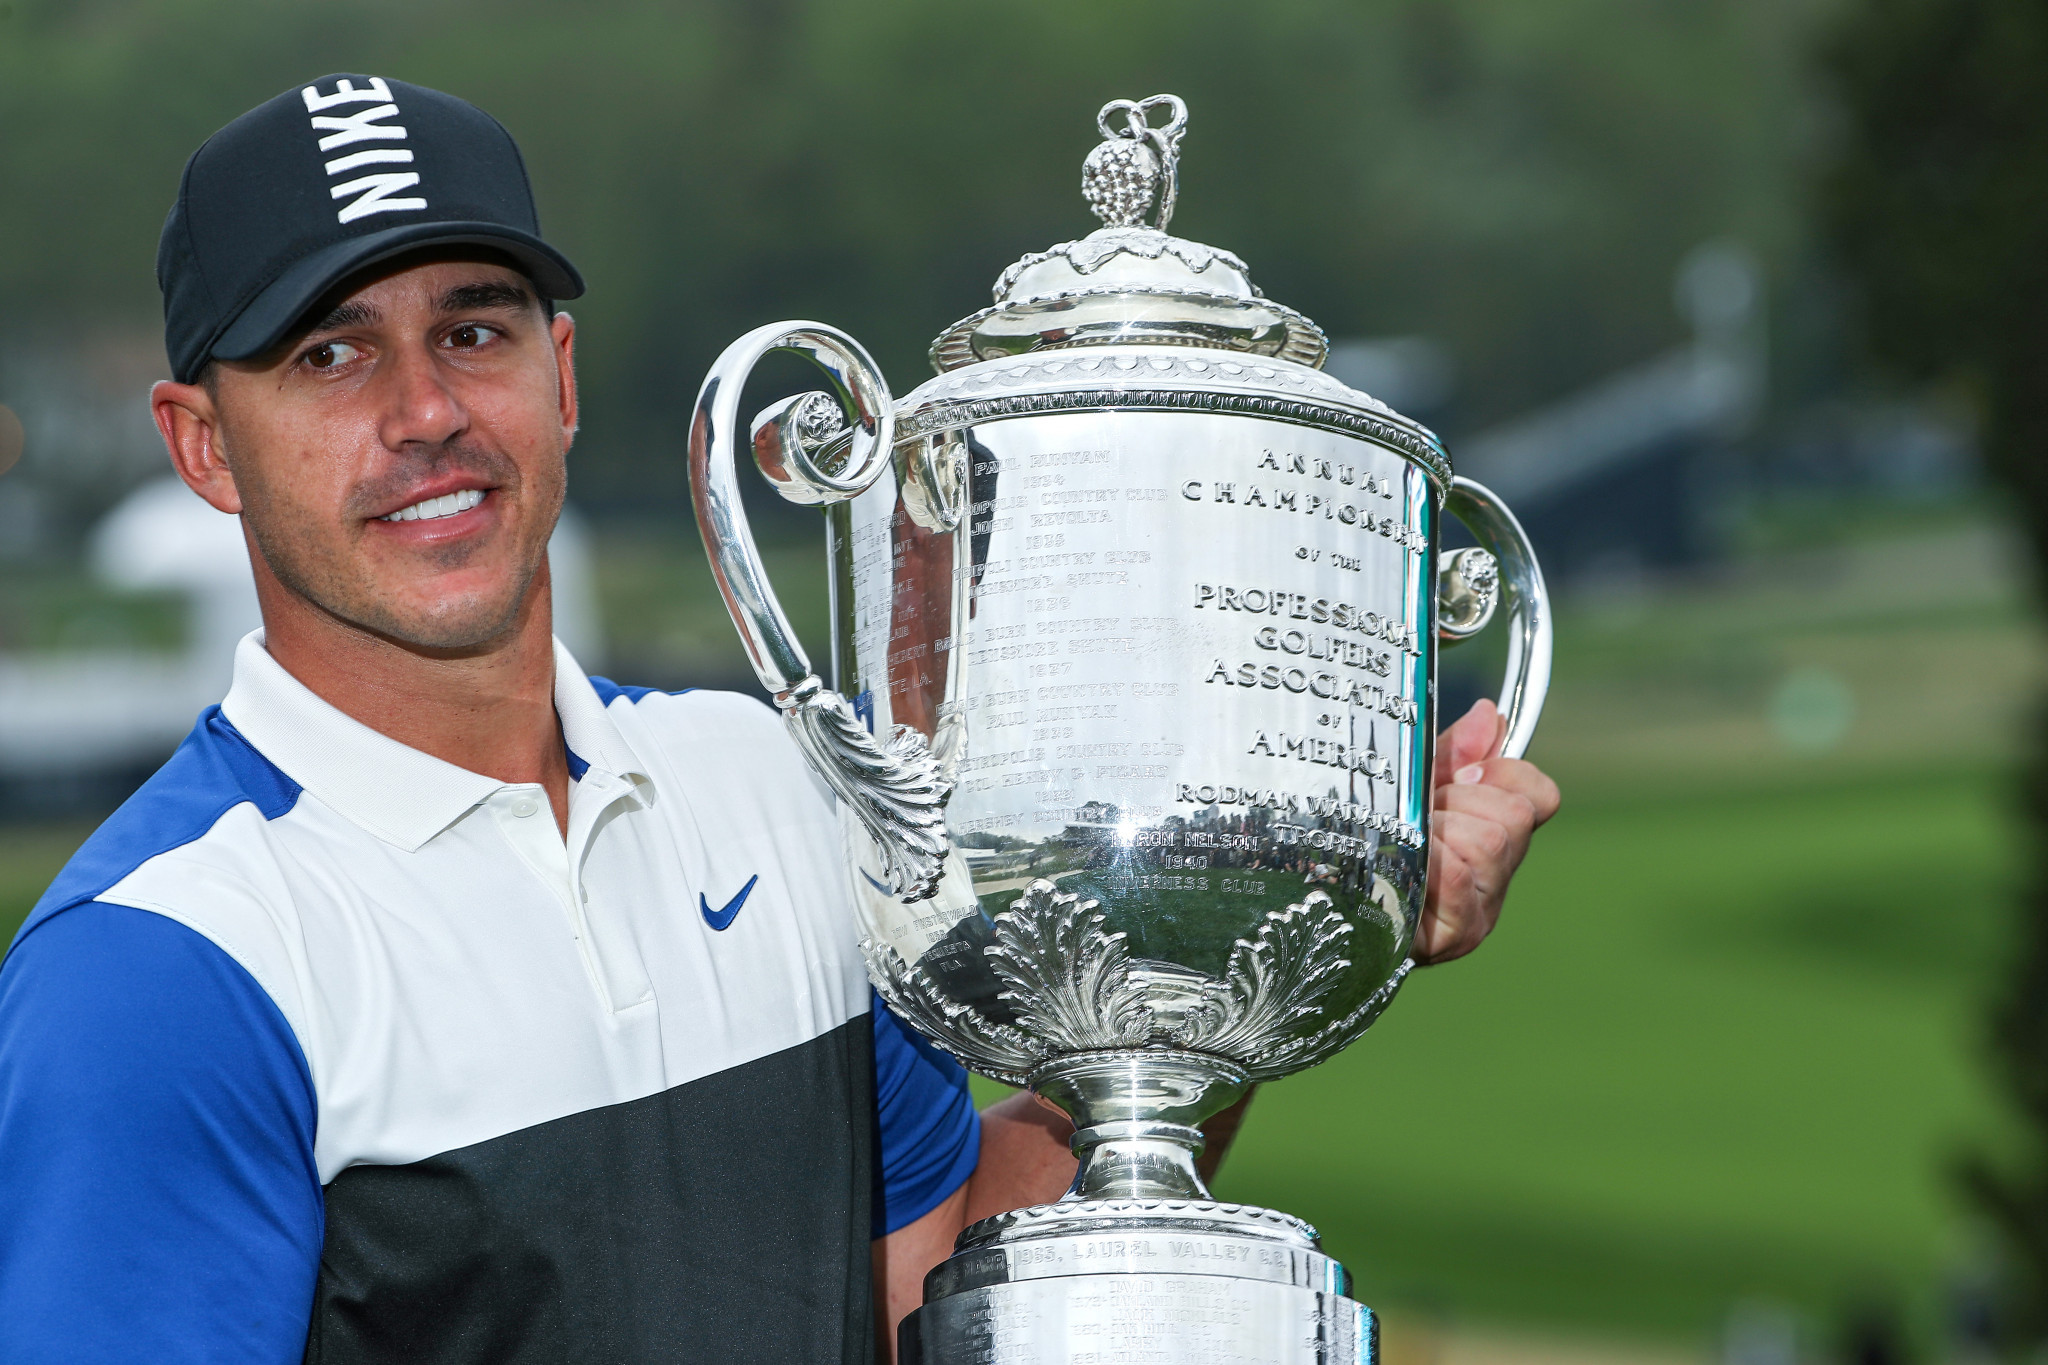 Koepka nominated for Team USA Best of May Awards after US PGA Championship victory 